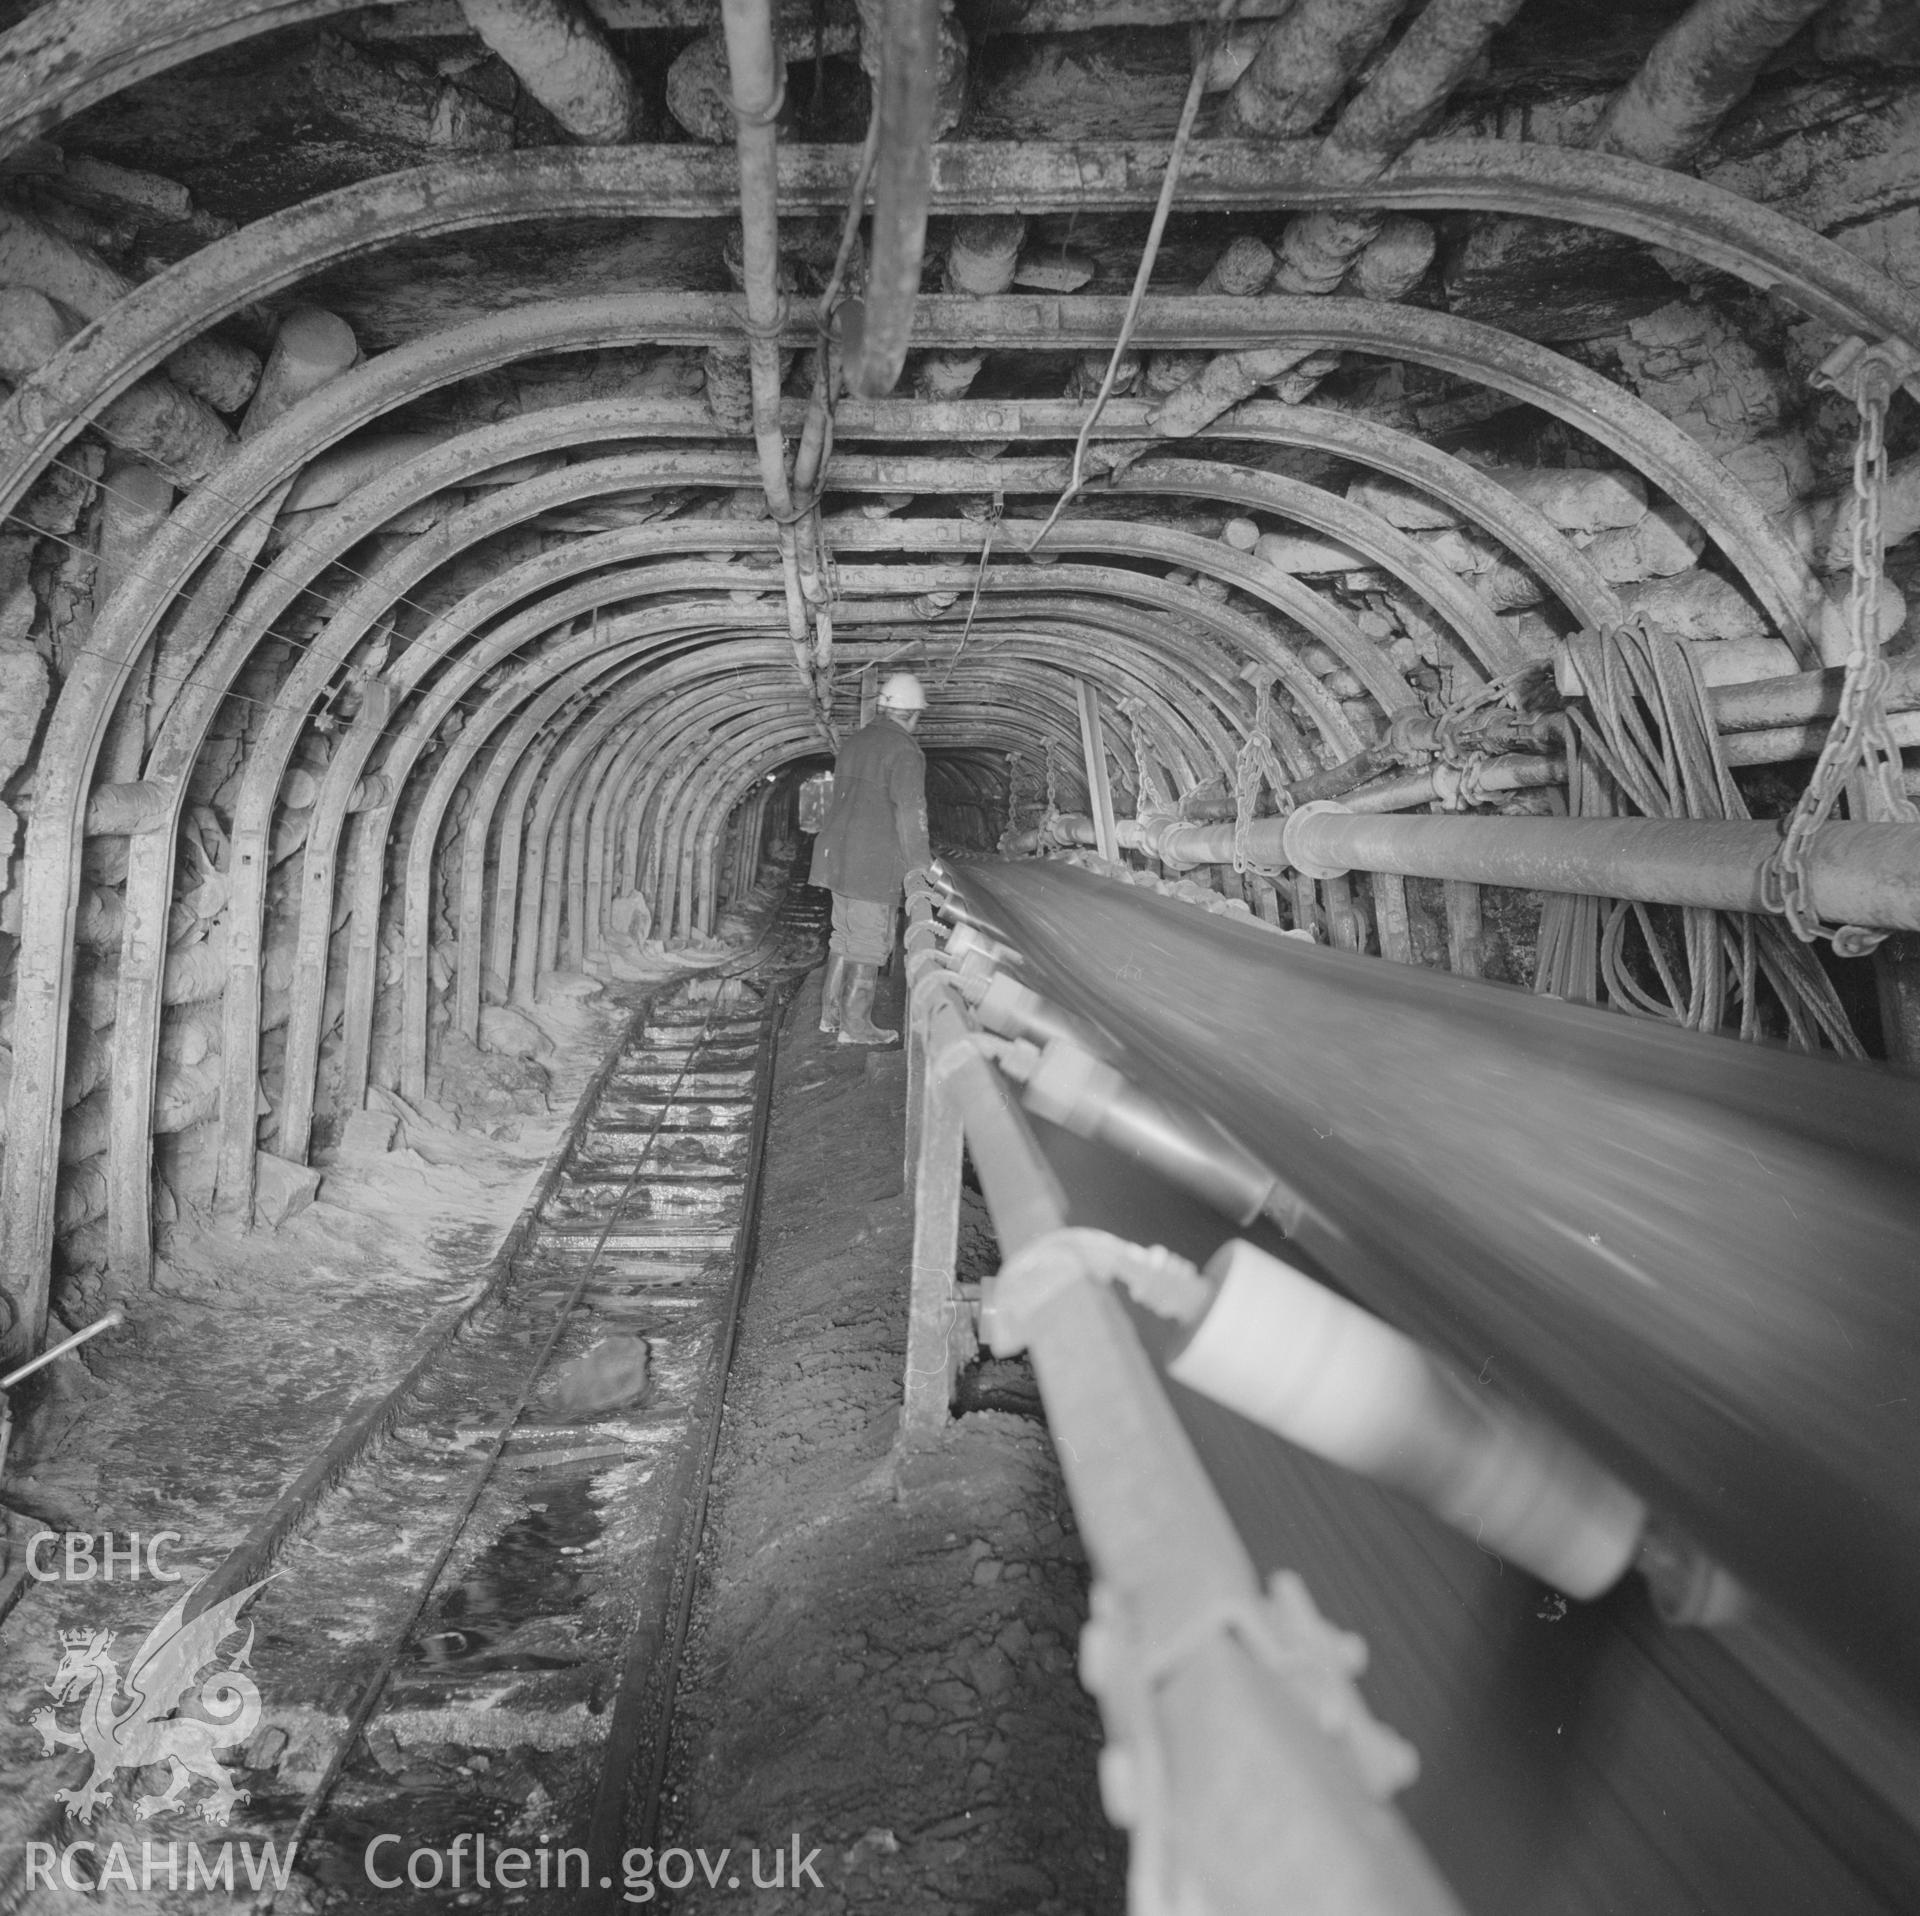 Digital copy of an acetate negative showing trunk road with conveyor belt carrying coal at Big Pit,from the John Cornwell Collection.